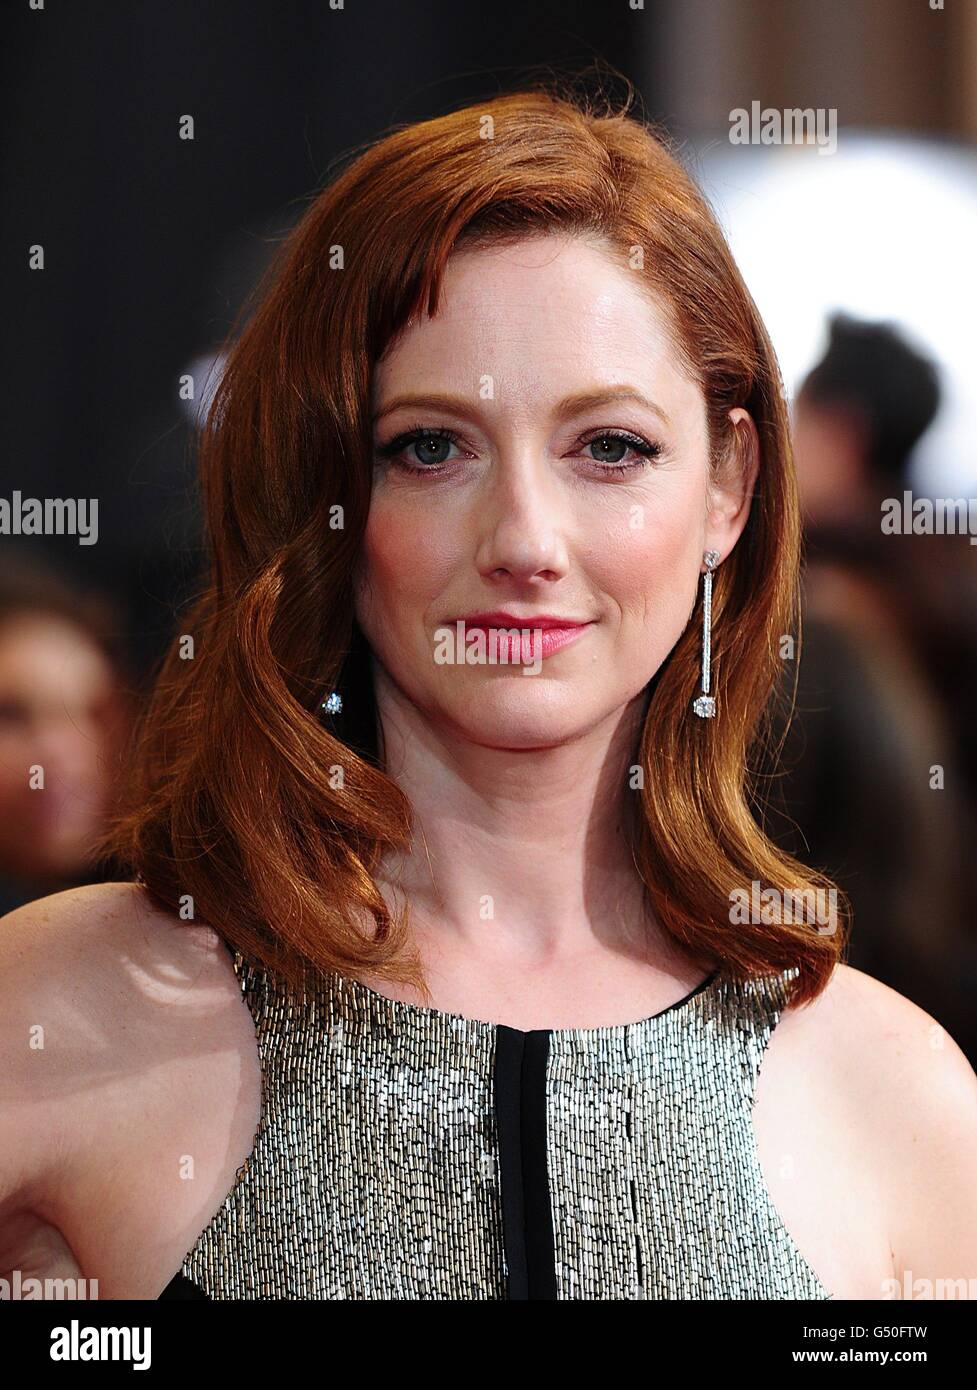 Judy Greer arriving at the 84th Annual Academy Awards, held at the Kodak Theatre in Los Angeles, CA, USA on February 26, 2012. () Stock Photo